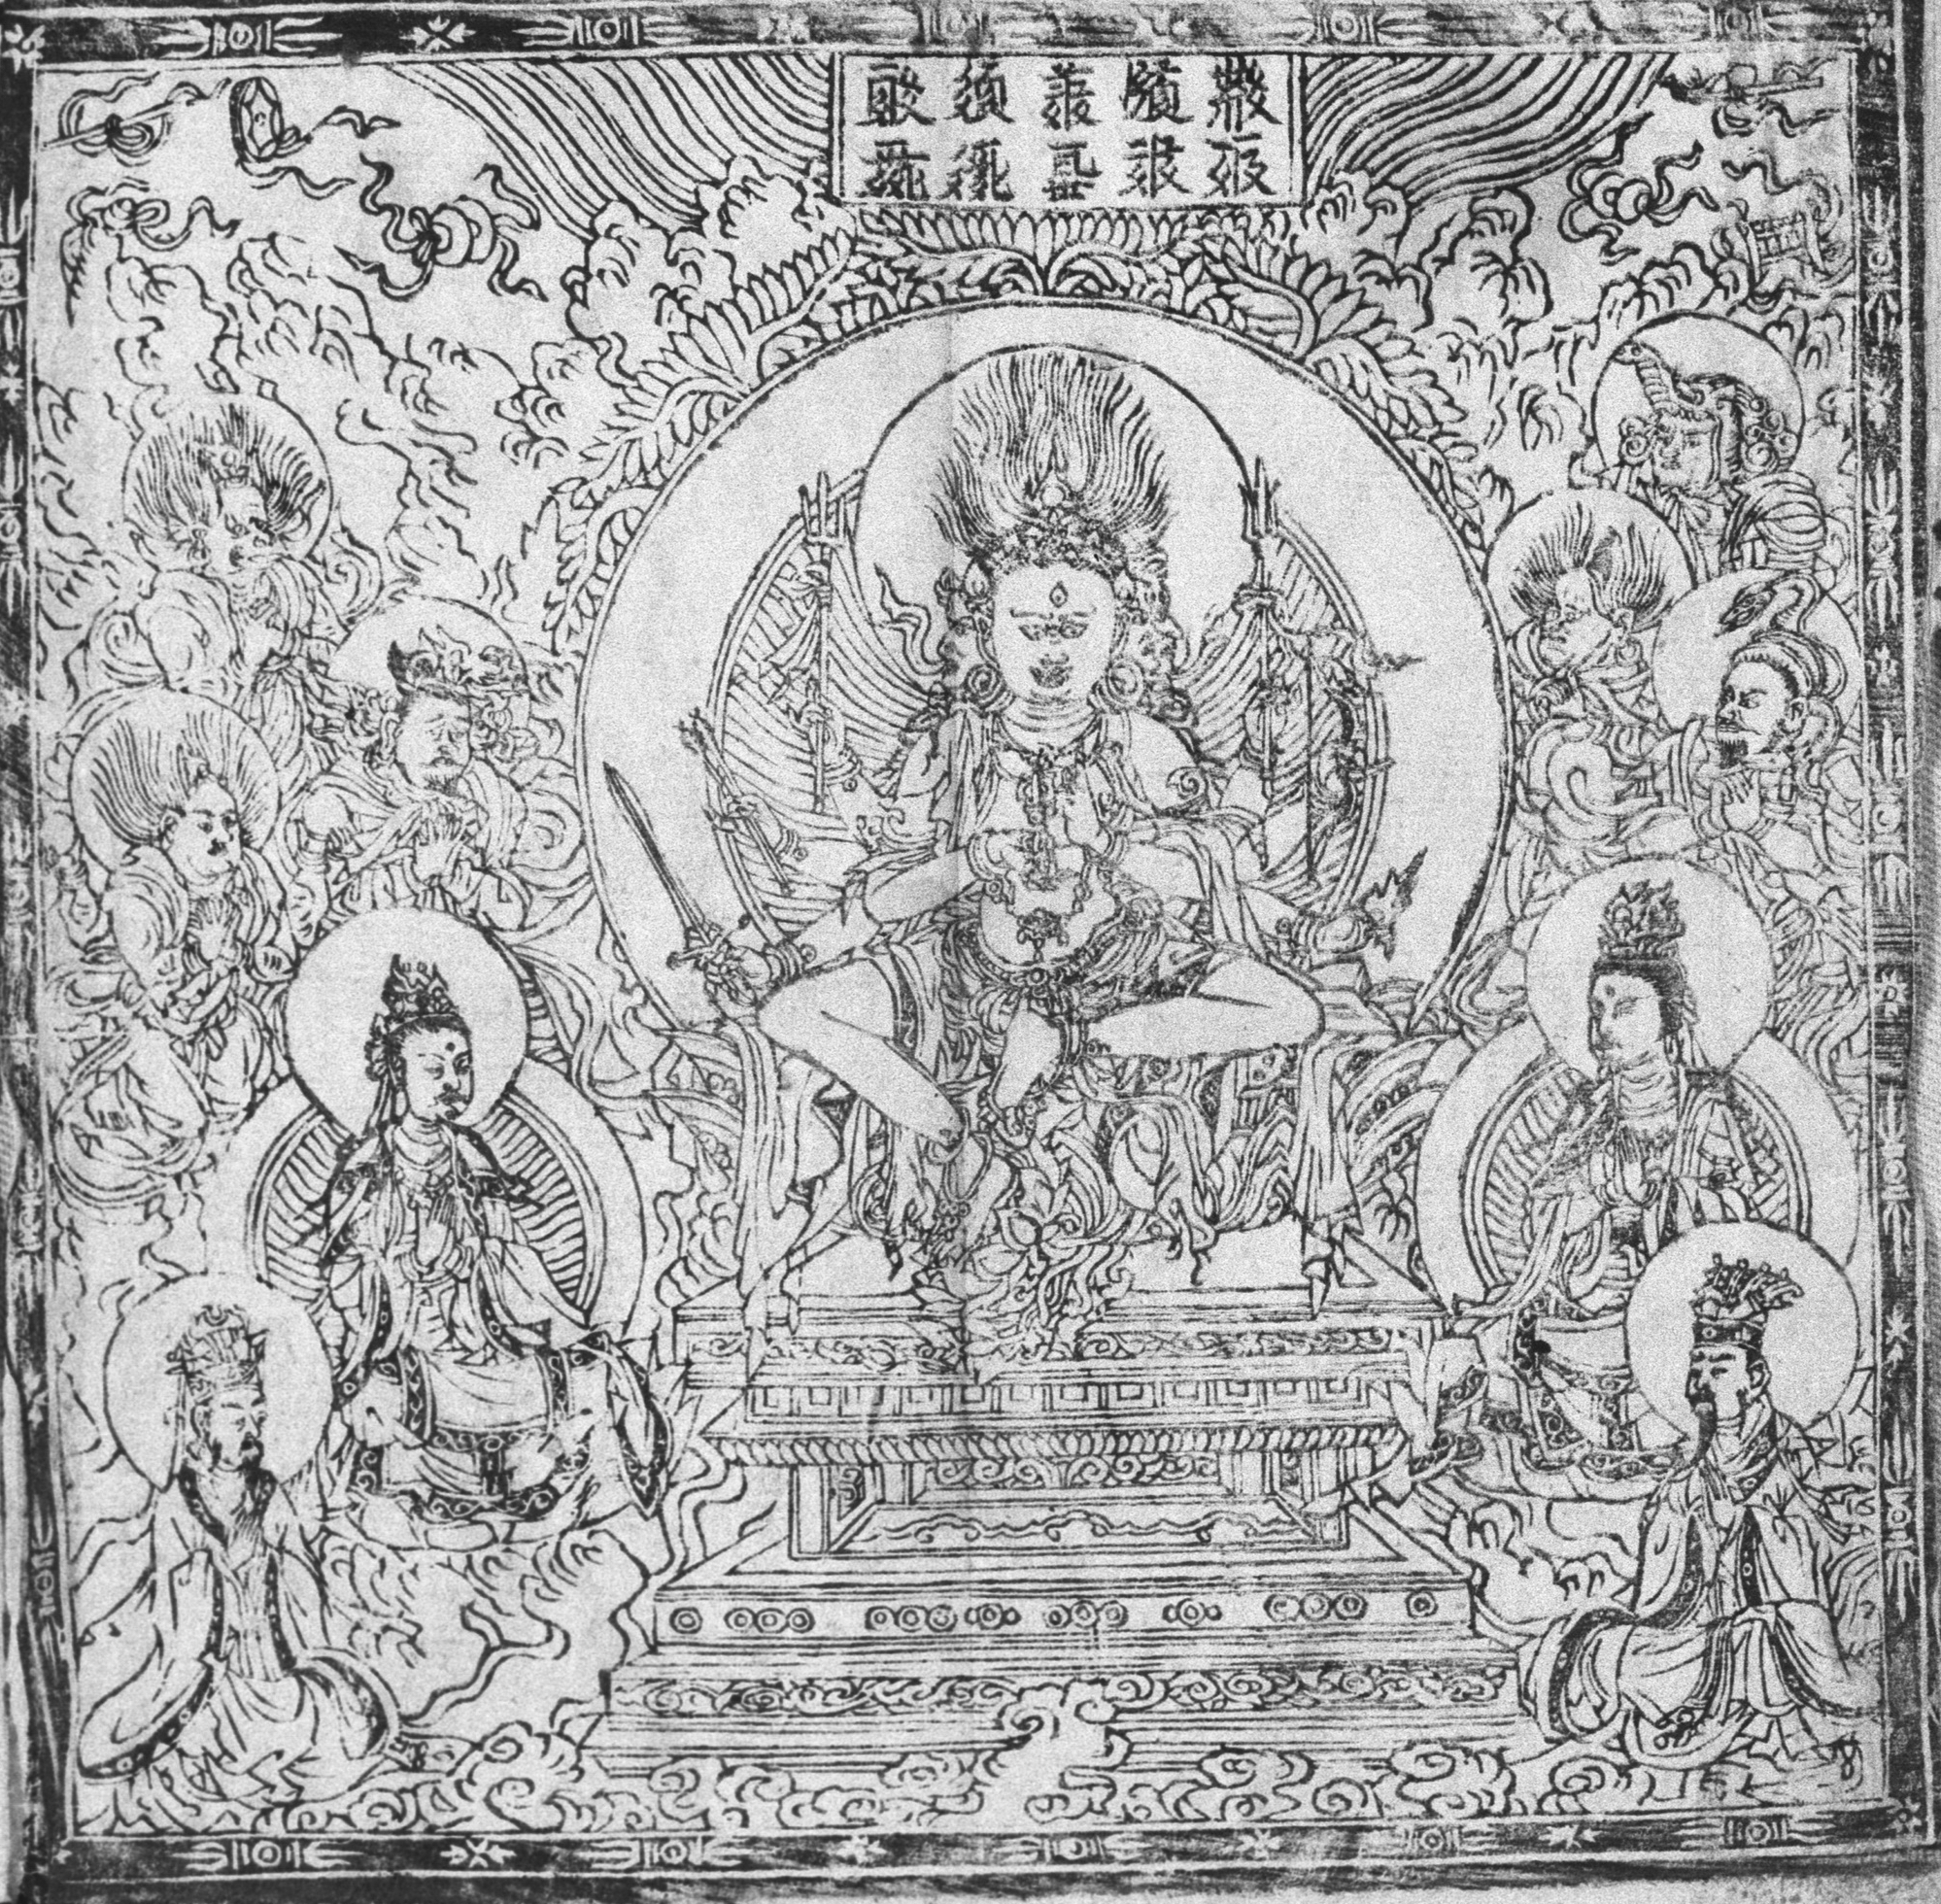 Abundantly detailed line drawing depicting enthroned deity surrounded by attendants; Chinese characters at top center